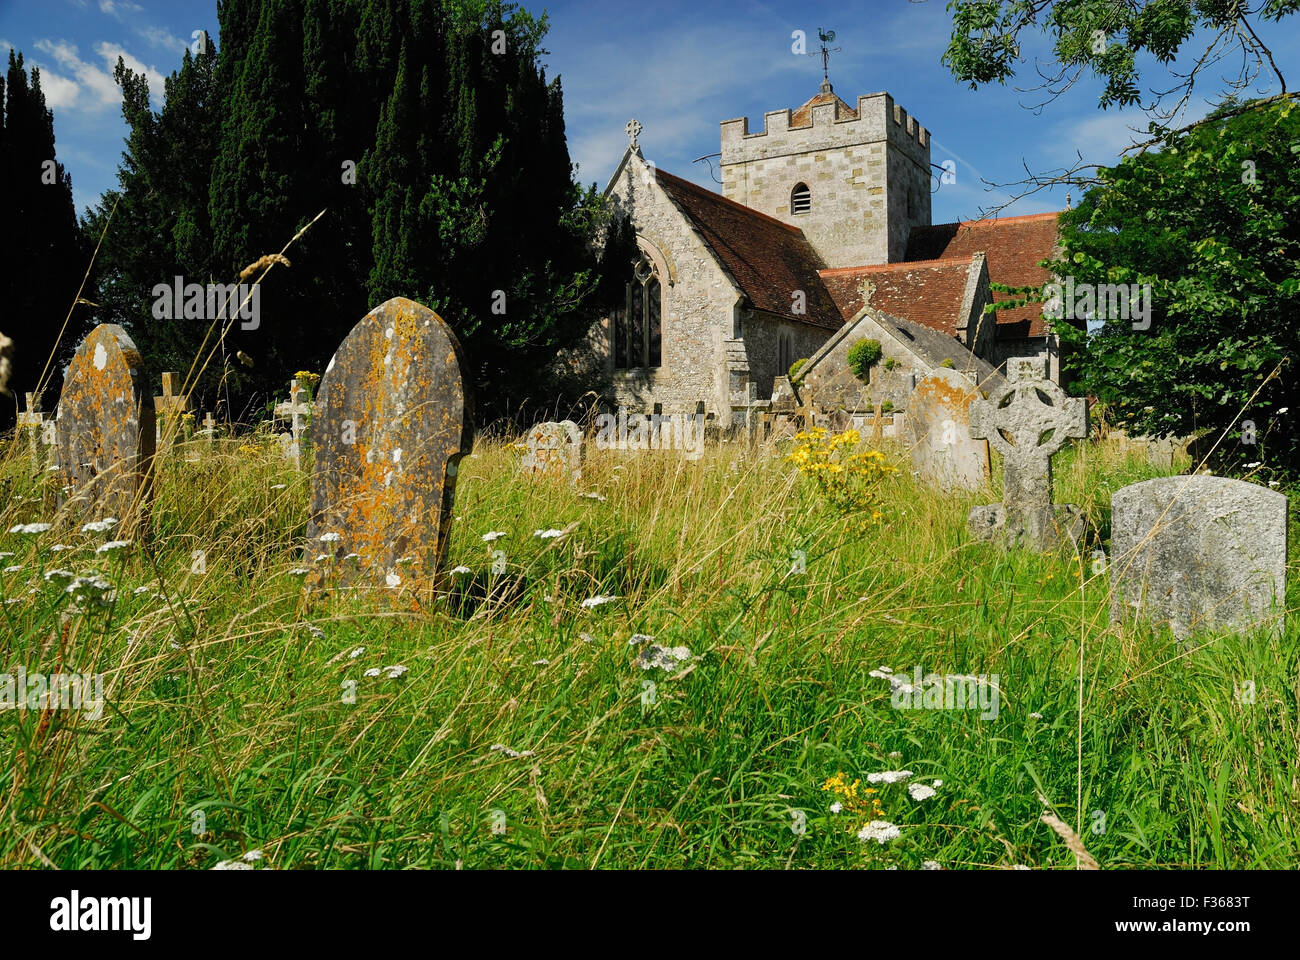 St Peter's church, Britford, Wiltshire. Stock Photo